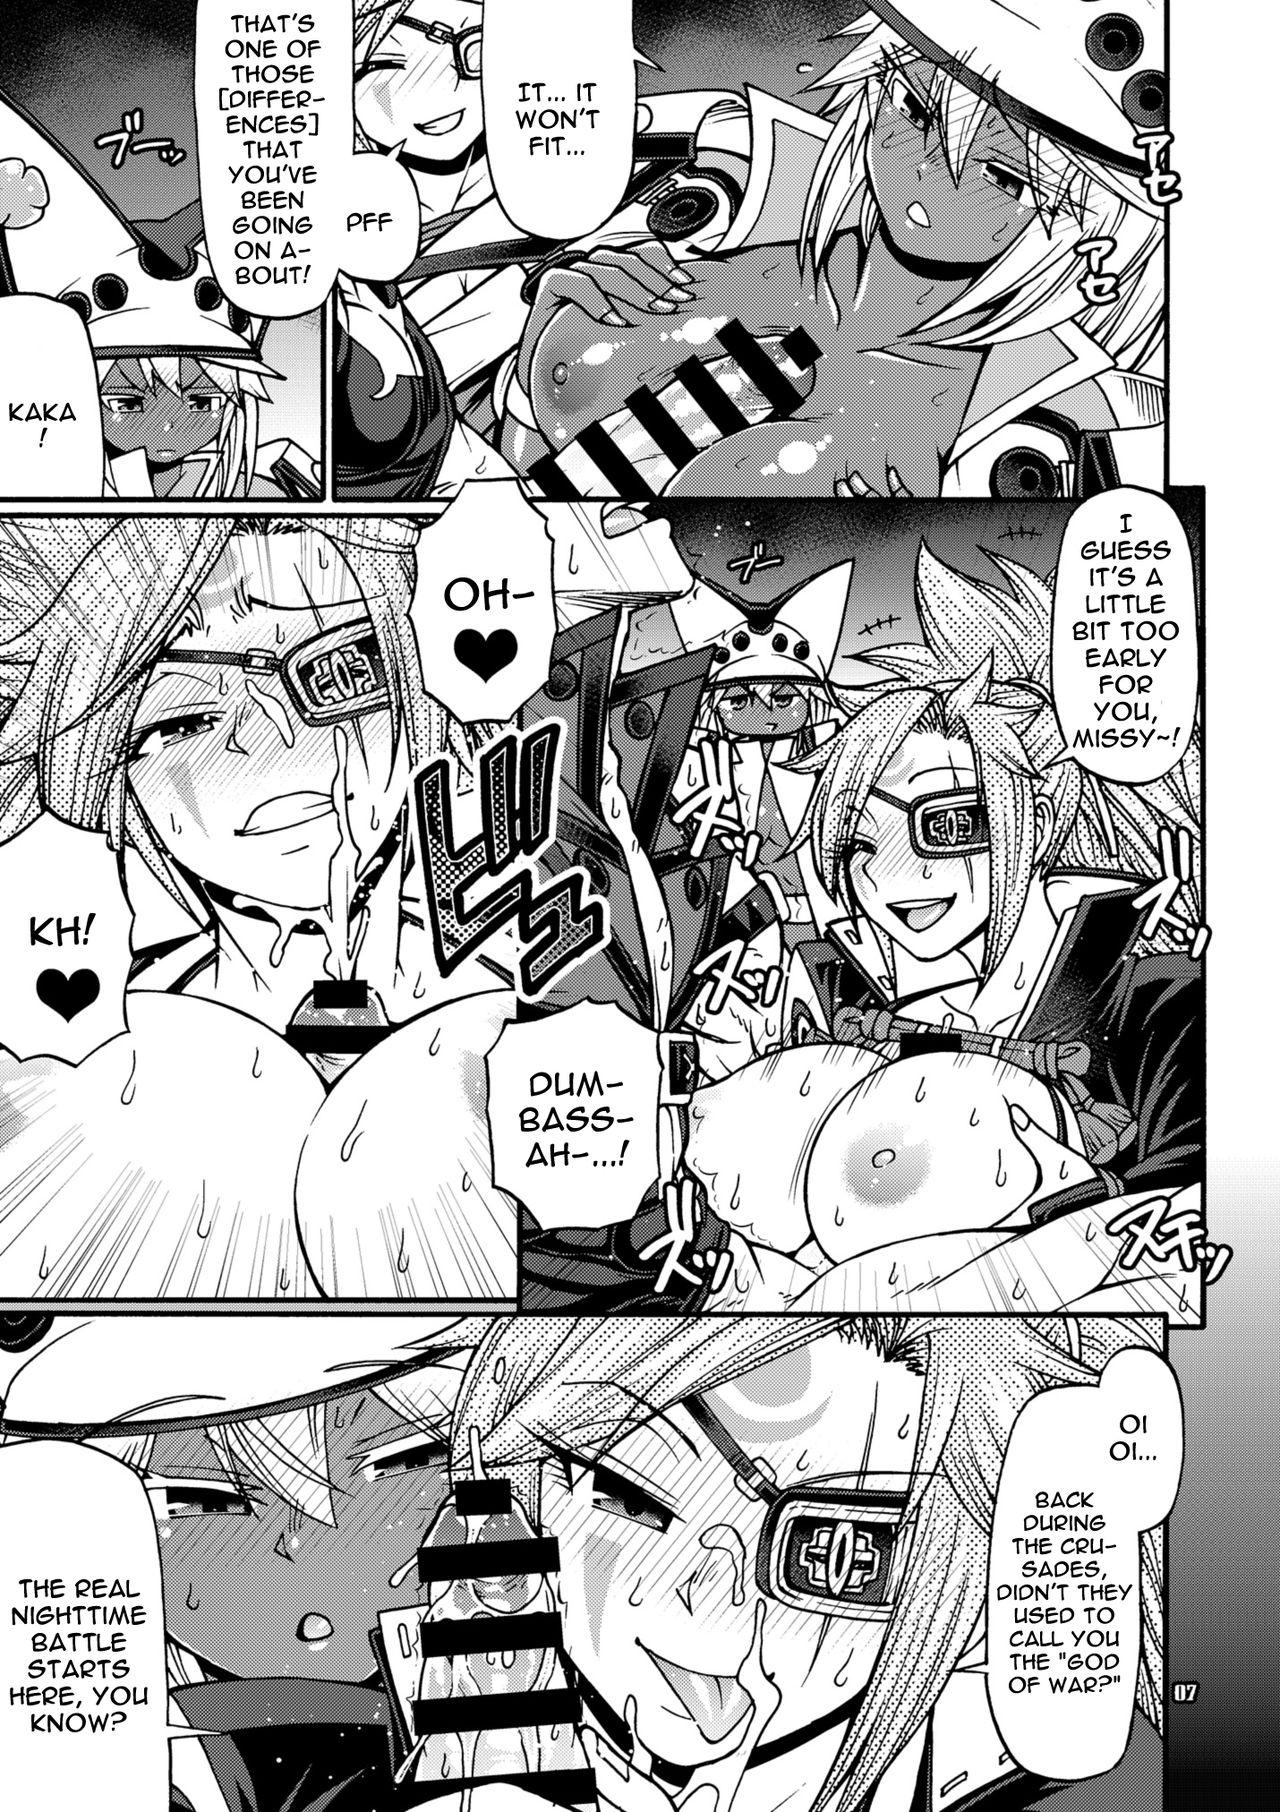 Doublepenetration Do What You Wanna Do - Guilty gear Rough Sex - Page 6